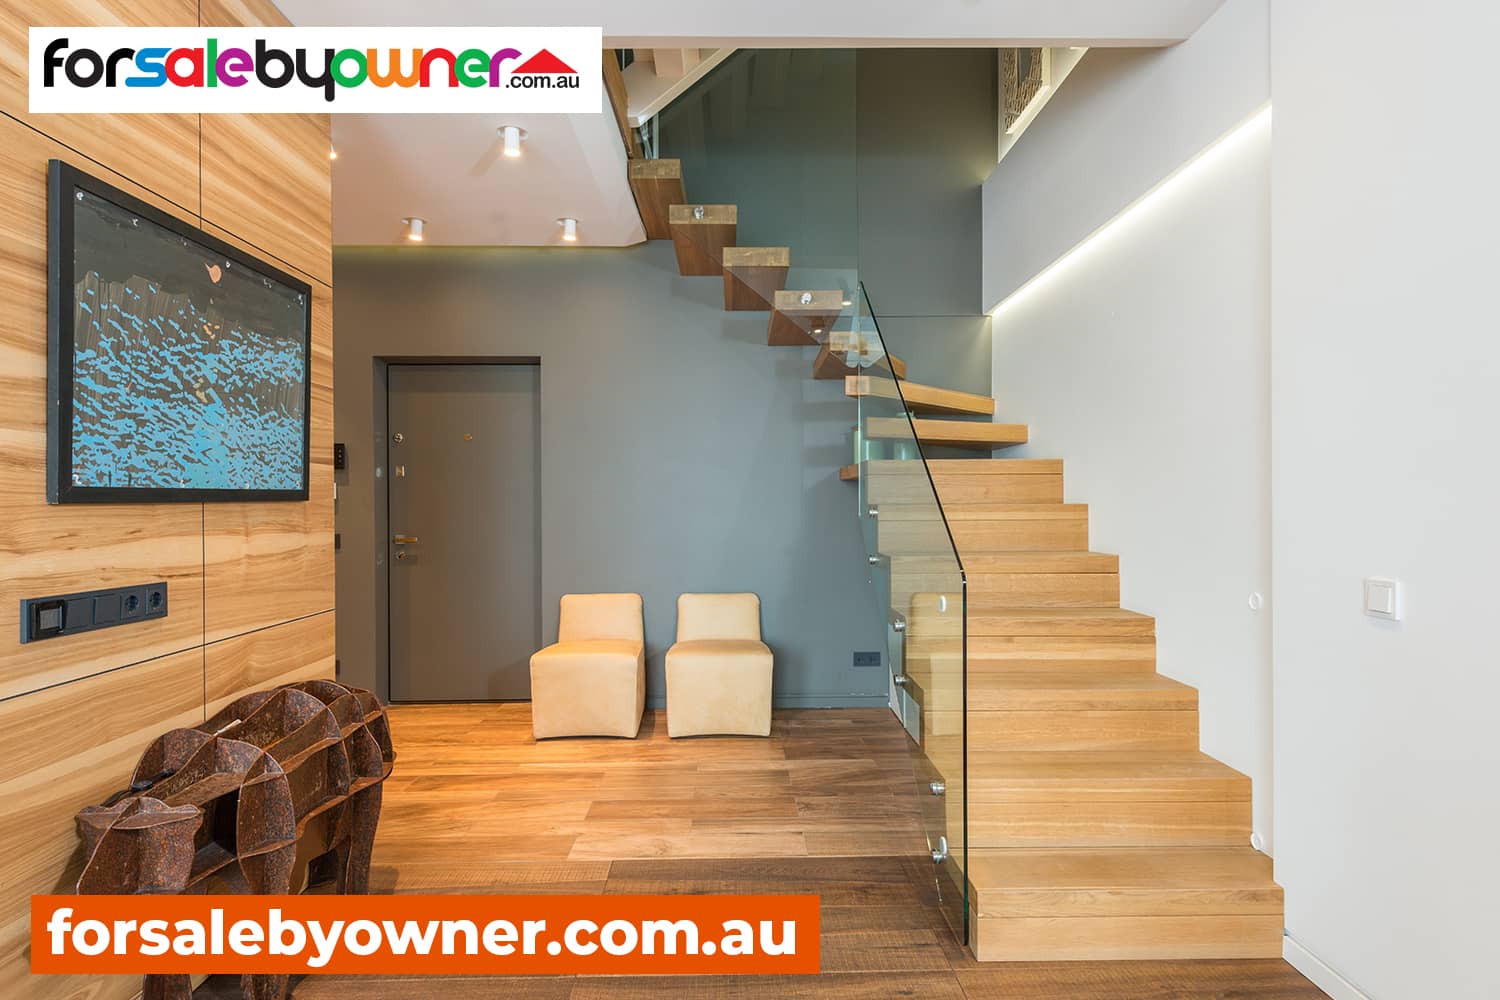 Sell House Privately On Realestate.com.au